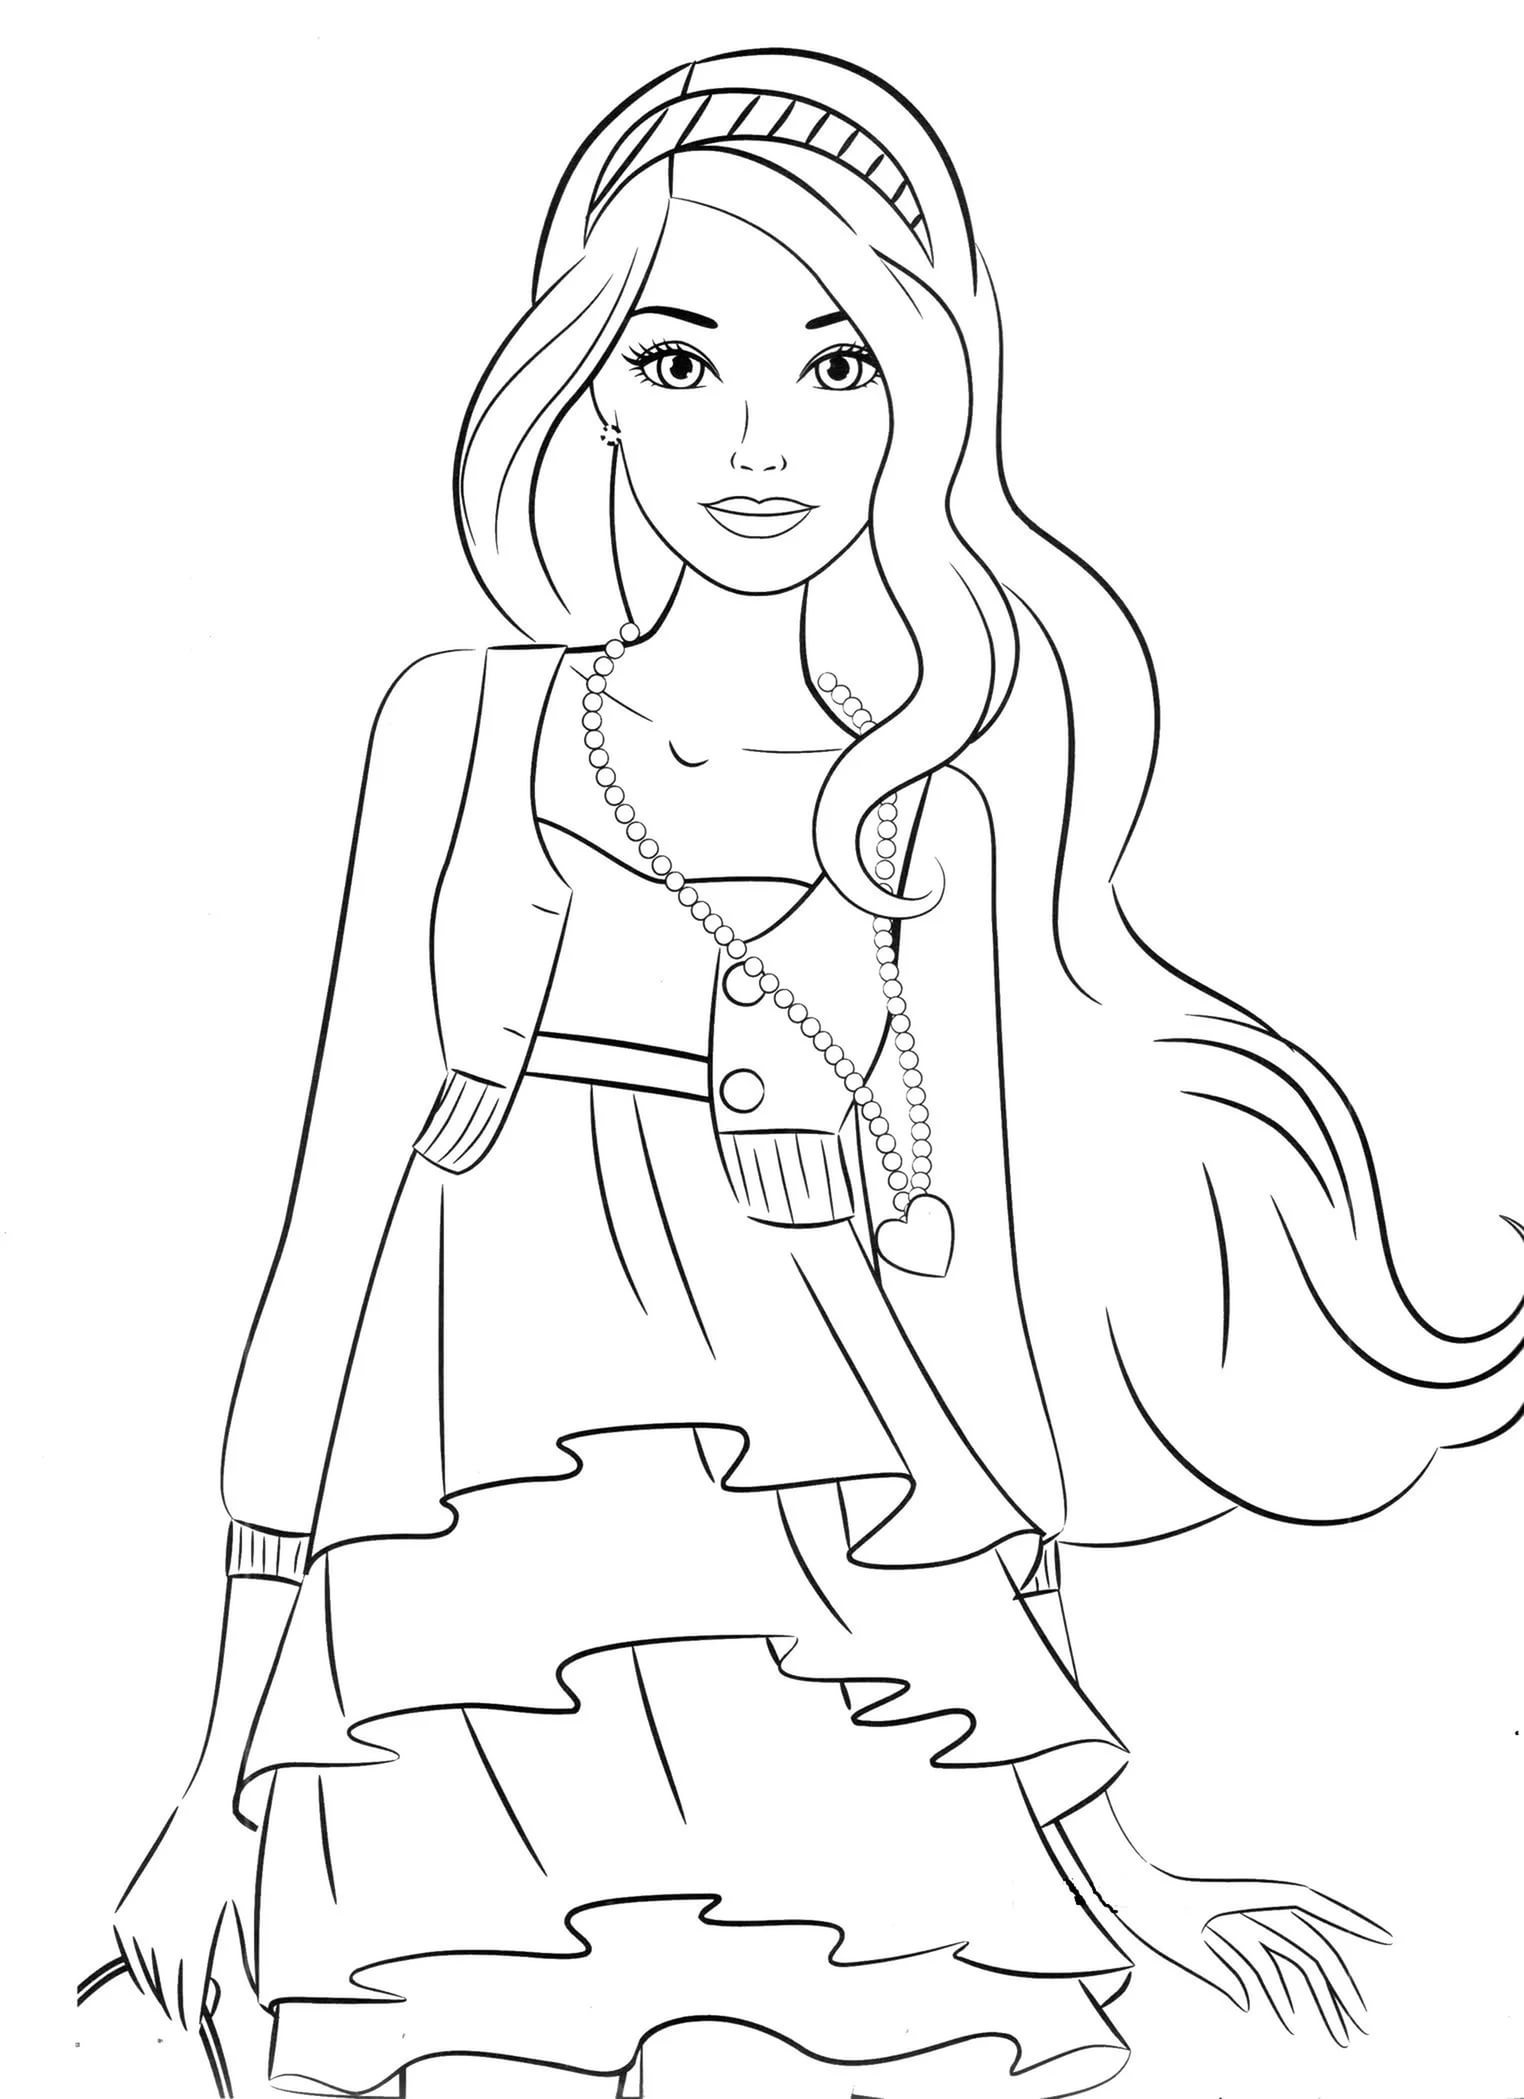 Printable Coloring Pages Girls
 Coloring pages for 8 9 10 year old girls to and